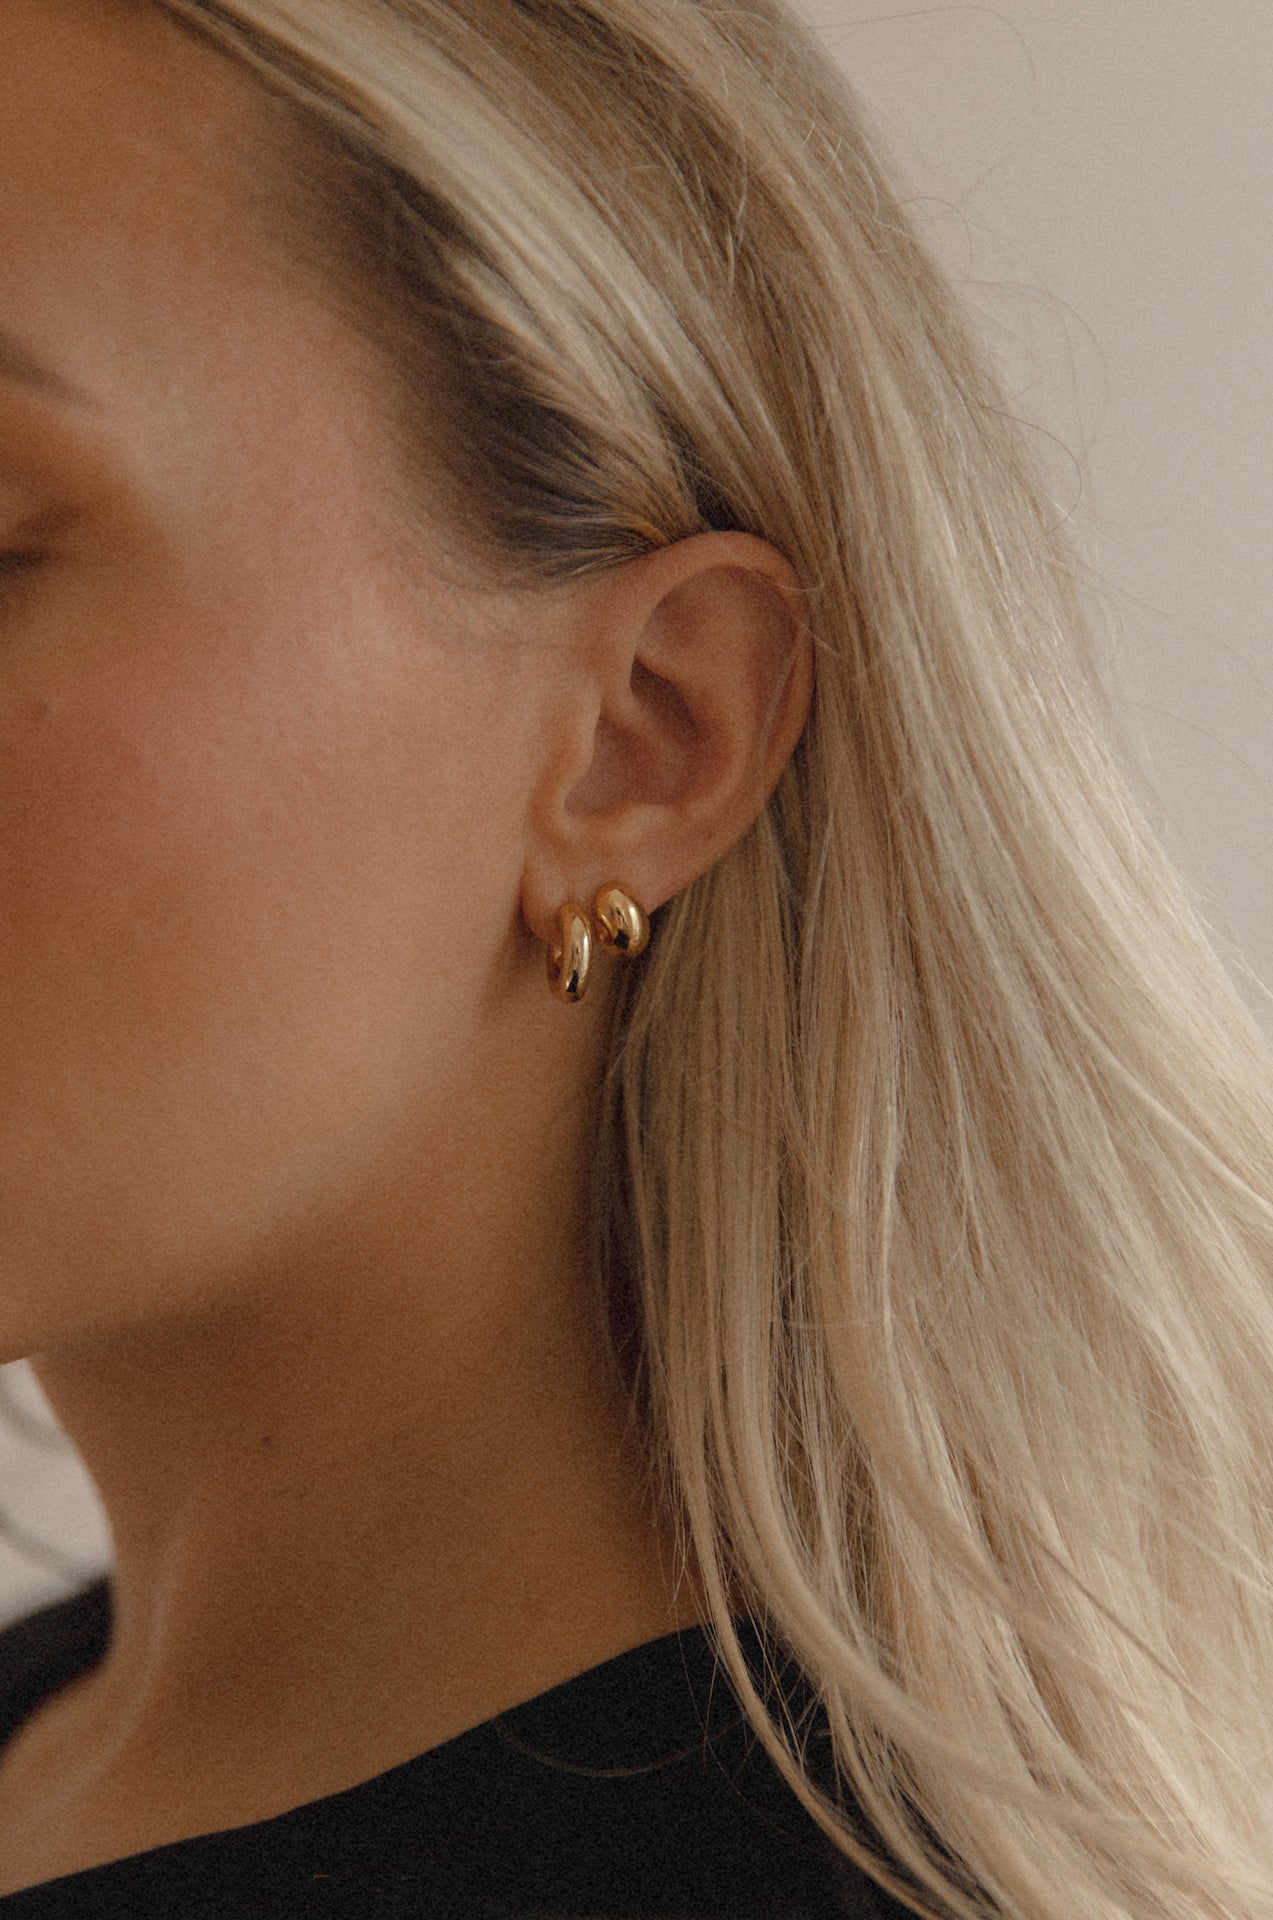 18k gold dome earrings stacked with thick mini hoop earrings